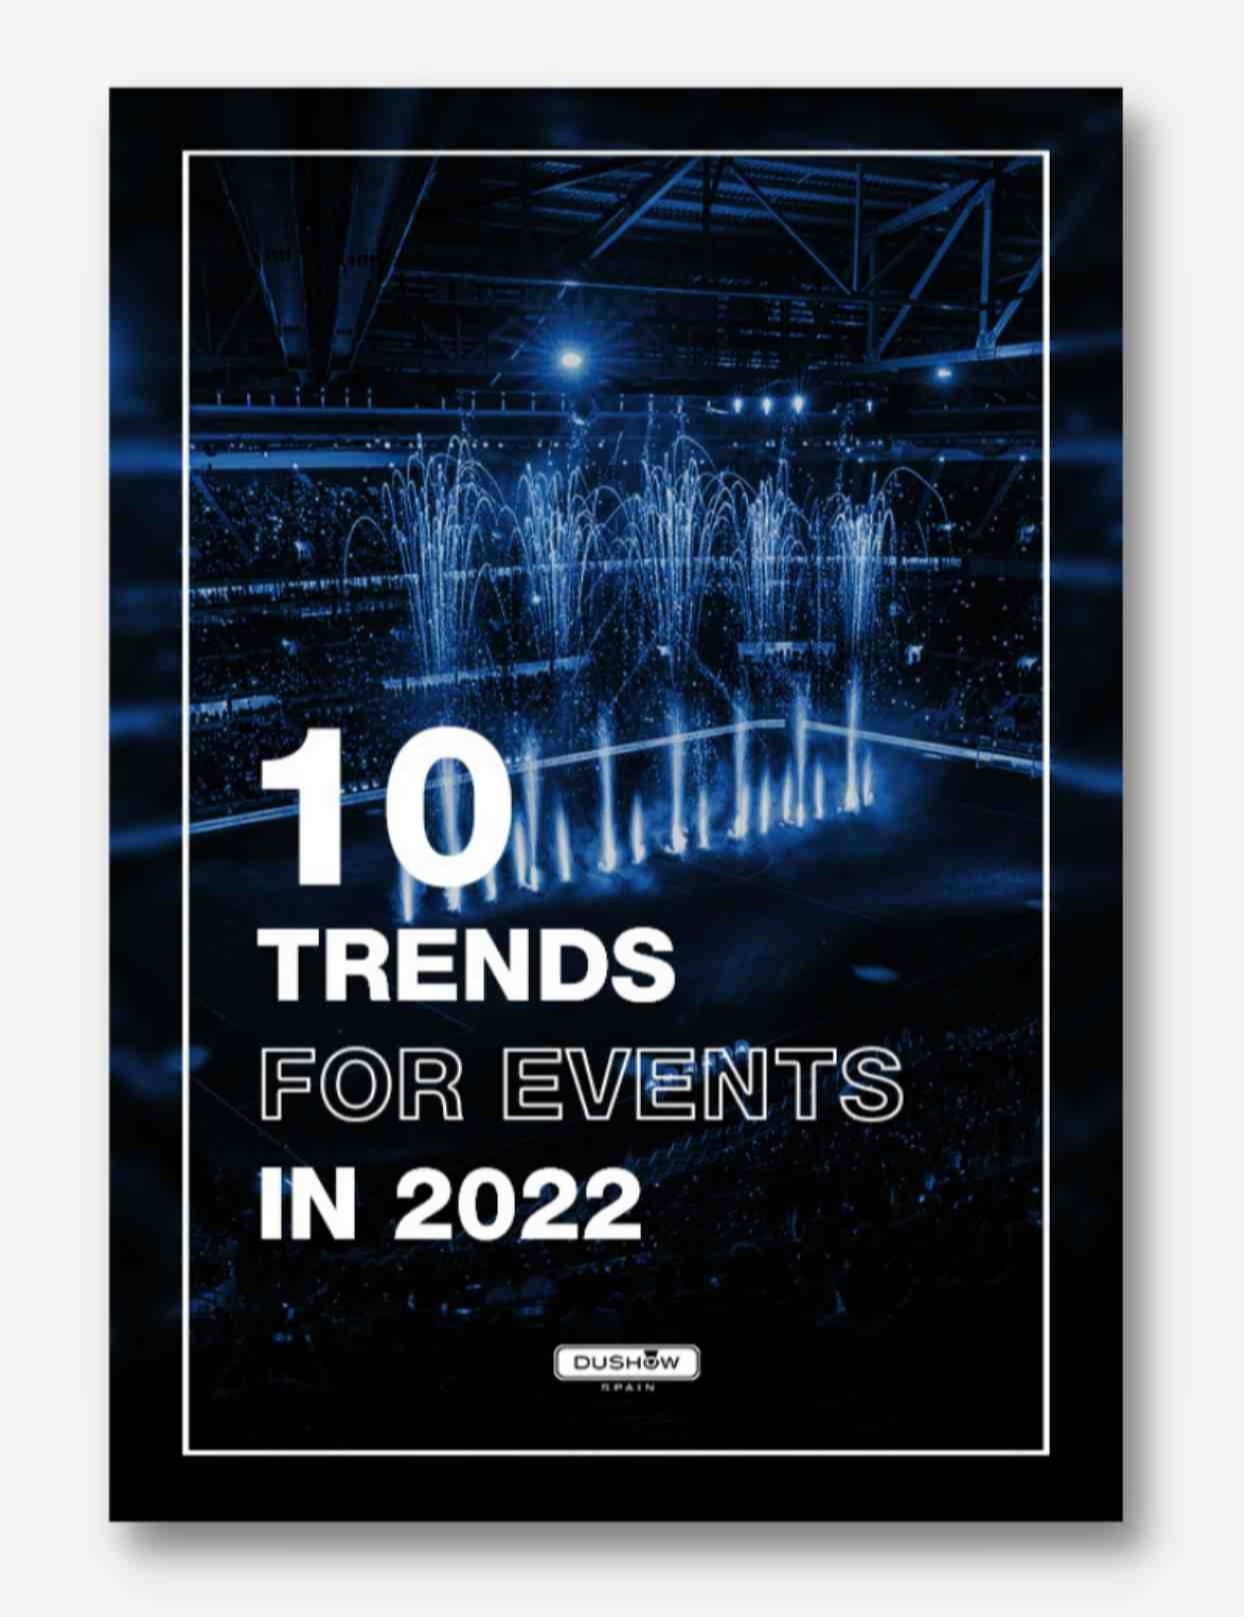 Trends for events